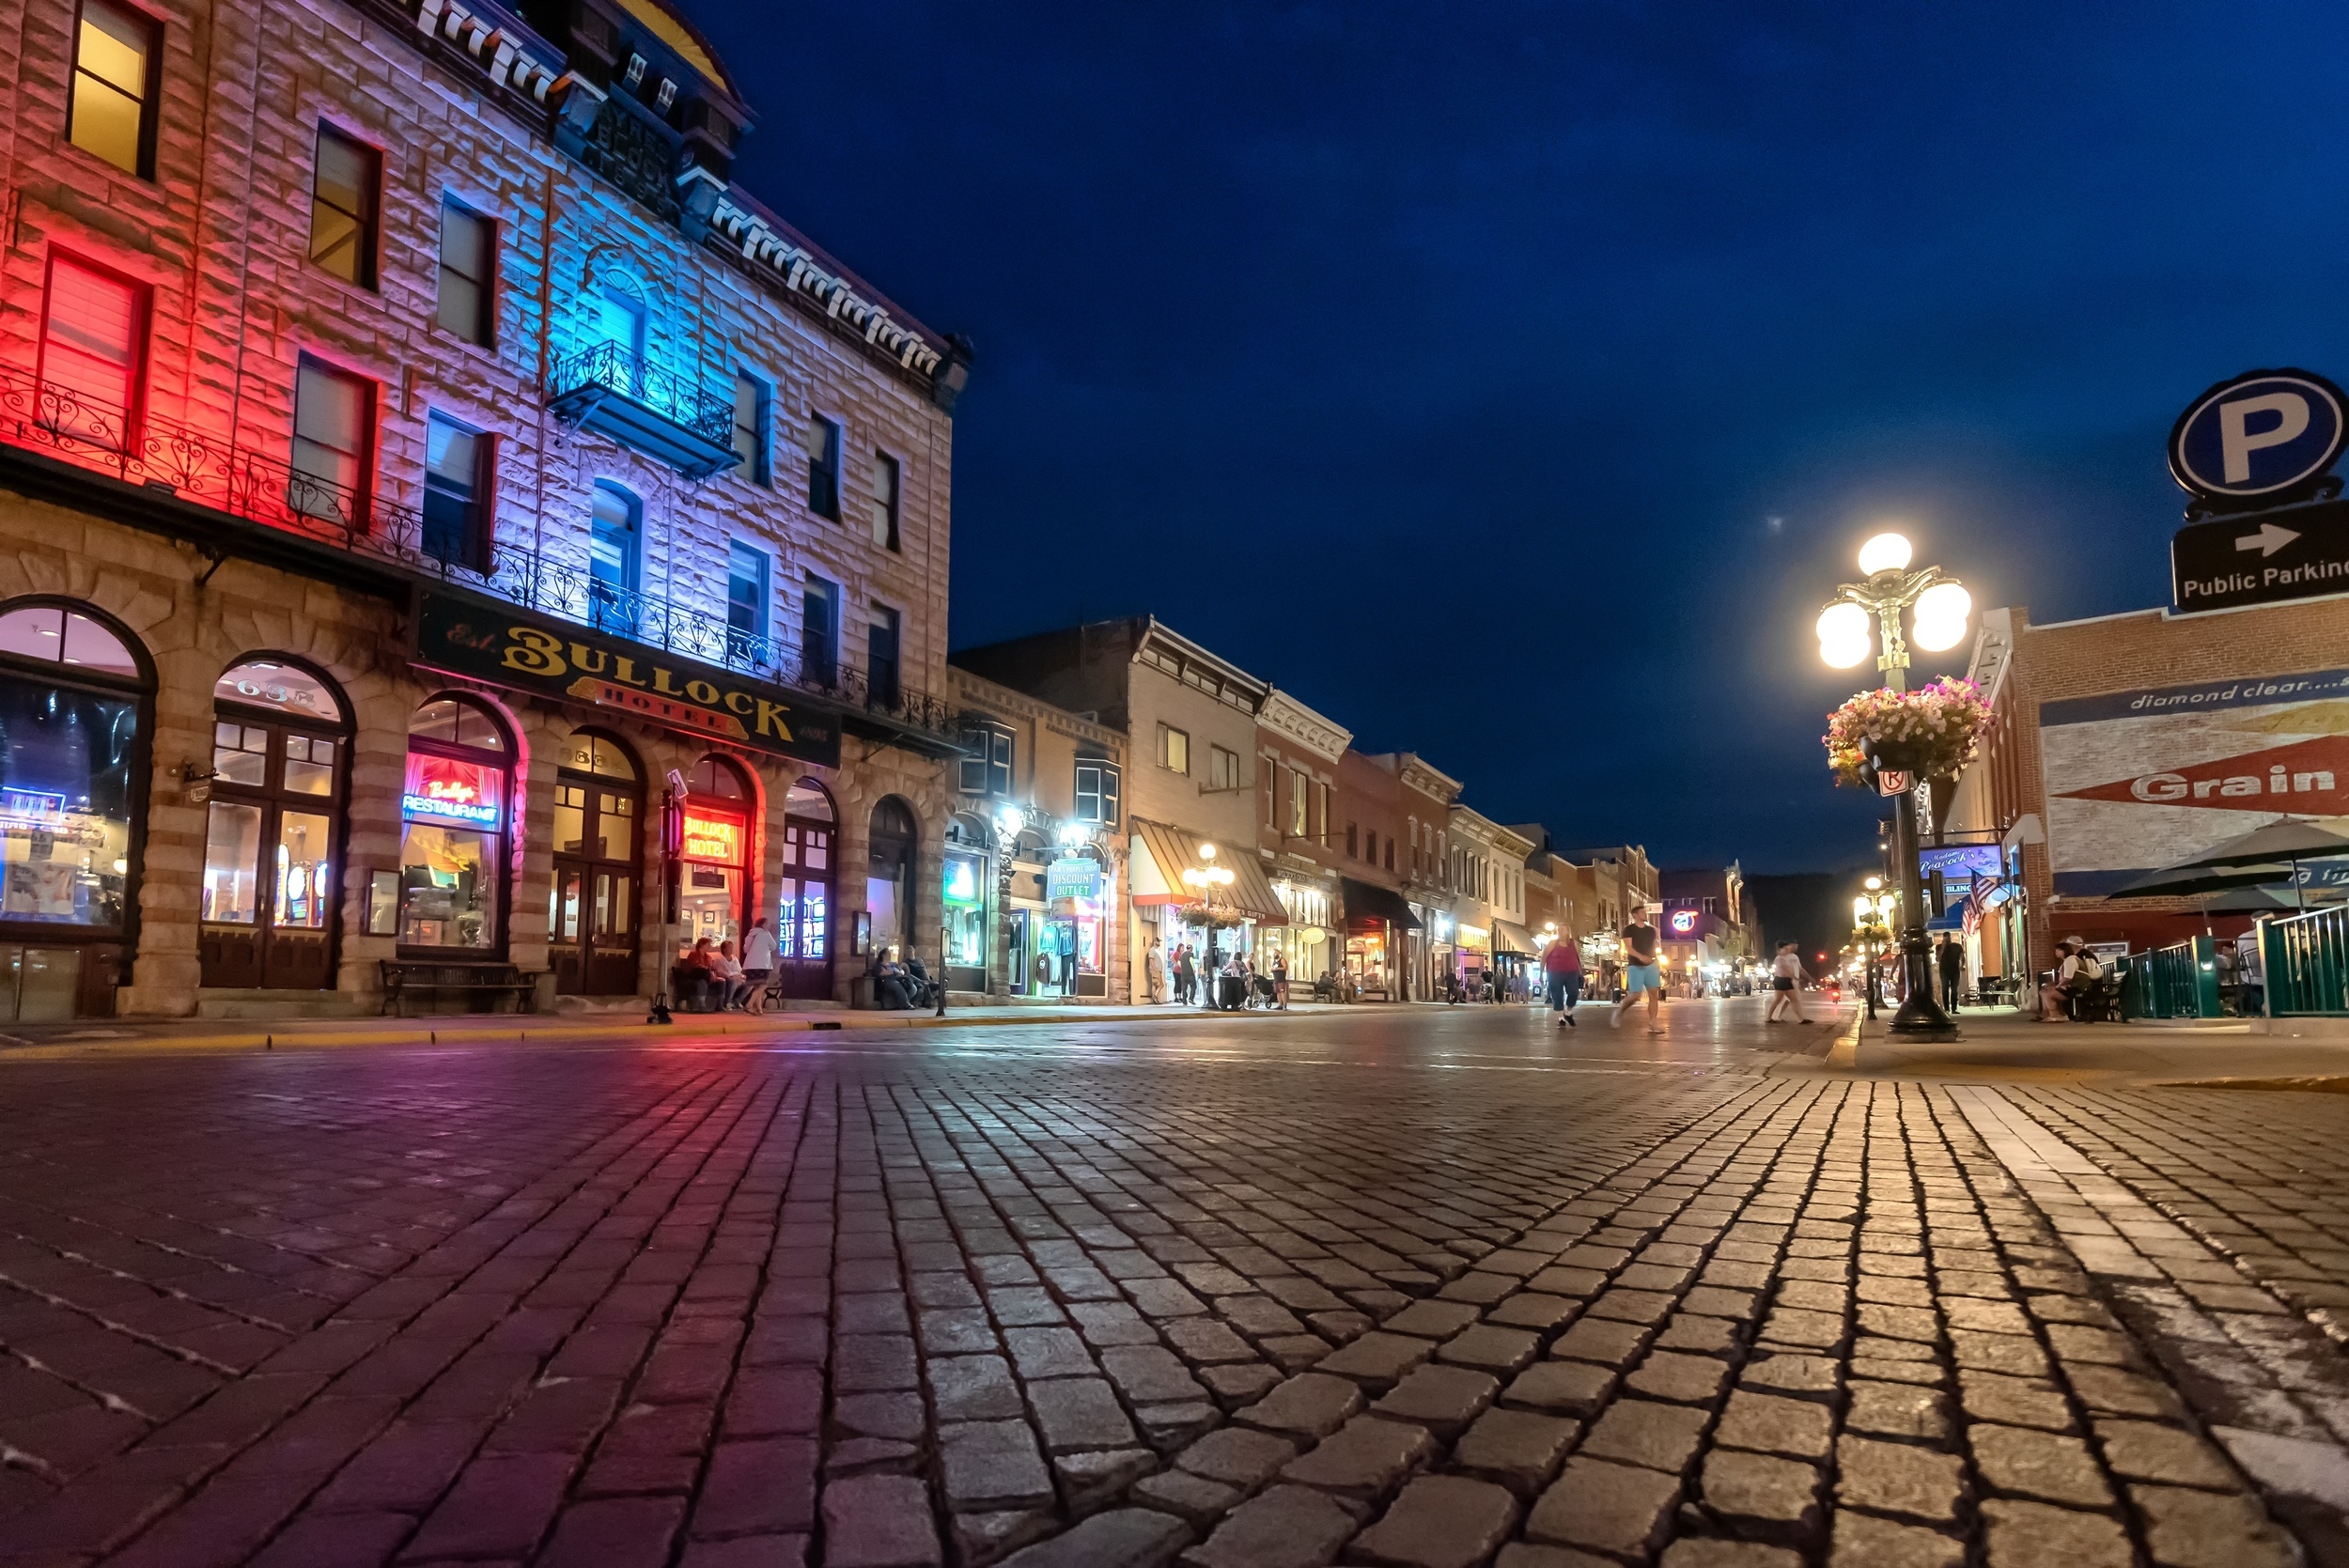 <p>If you’ve never been to South Dakota before, Deadwood will surprise you. Located in the Black Hills, the town is rife with history and gambling, and it's imbued uniquely in each of its bars. It's a small town, but it's packed with activity. </p><p><a href='https://www.msn.com/en-us/community/channel/vid-cj9pqbr0vn9in2b6ddcd8sfgpfq6x6utp44fssrv6mc2gtybw0us'>Follow us on MSN to see more of our exclusive lifestyle content.</a></p>